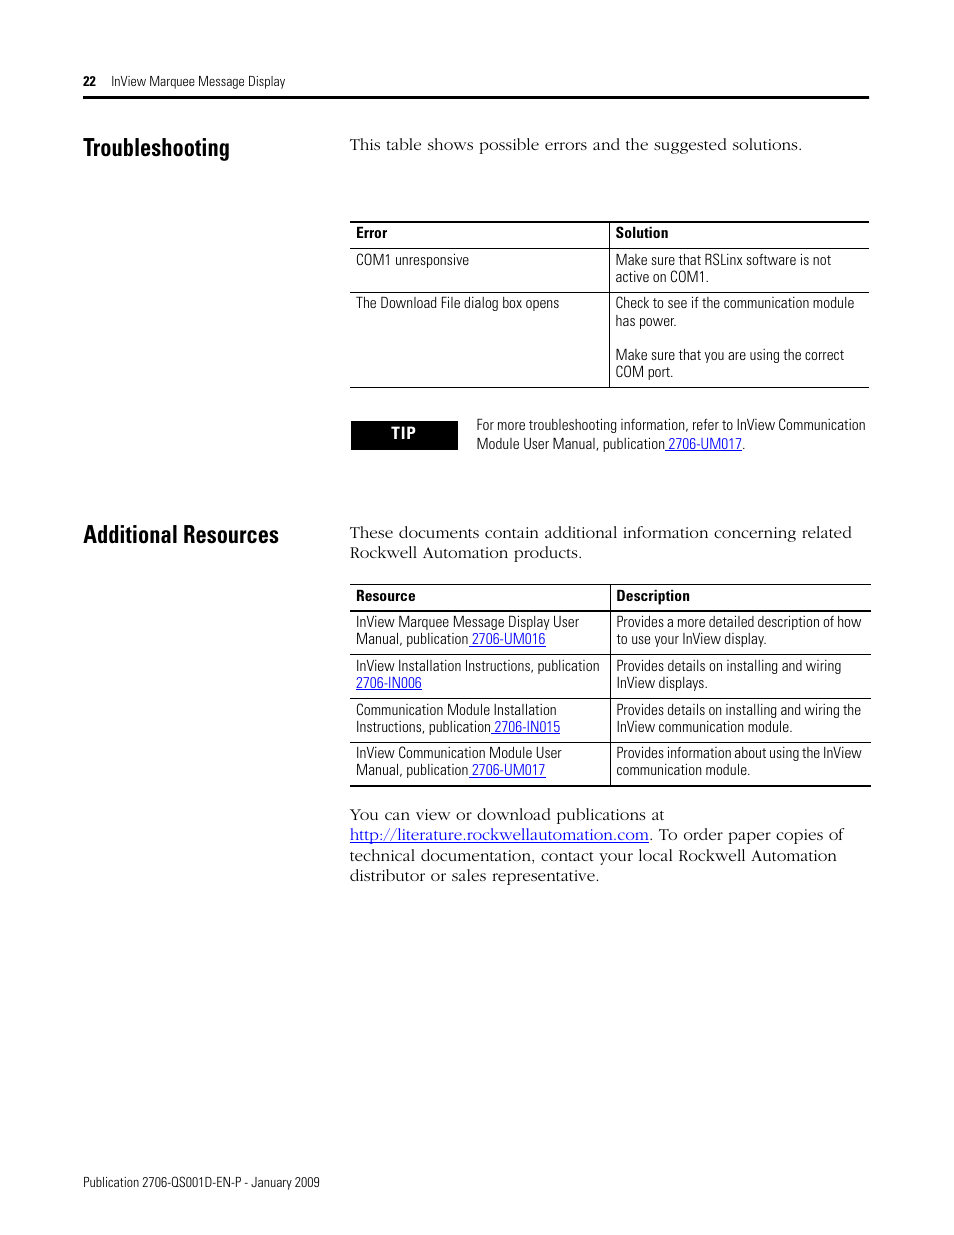 Troubleshooting, Additional resources | Rockwell Automation 2706-P_P InView Quick Start User Manual | Page 22 / 24